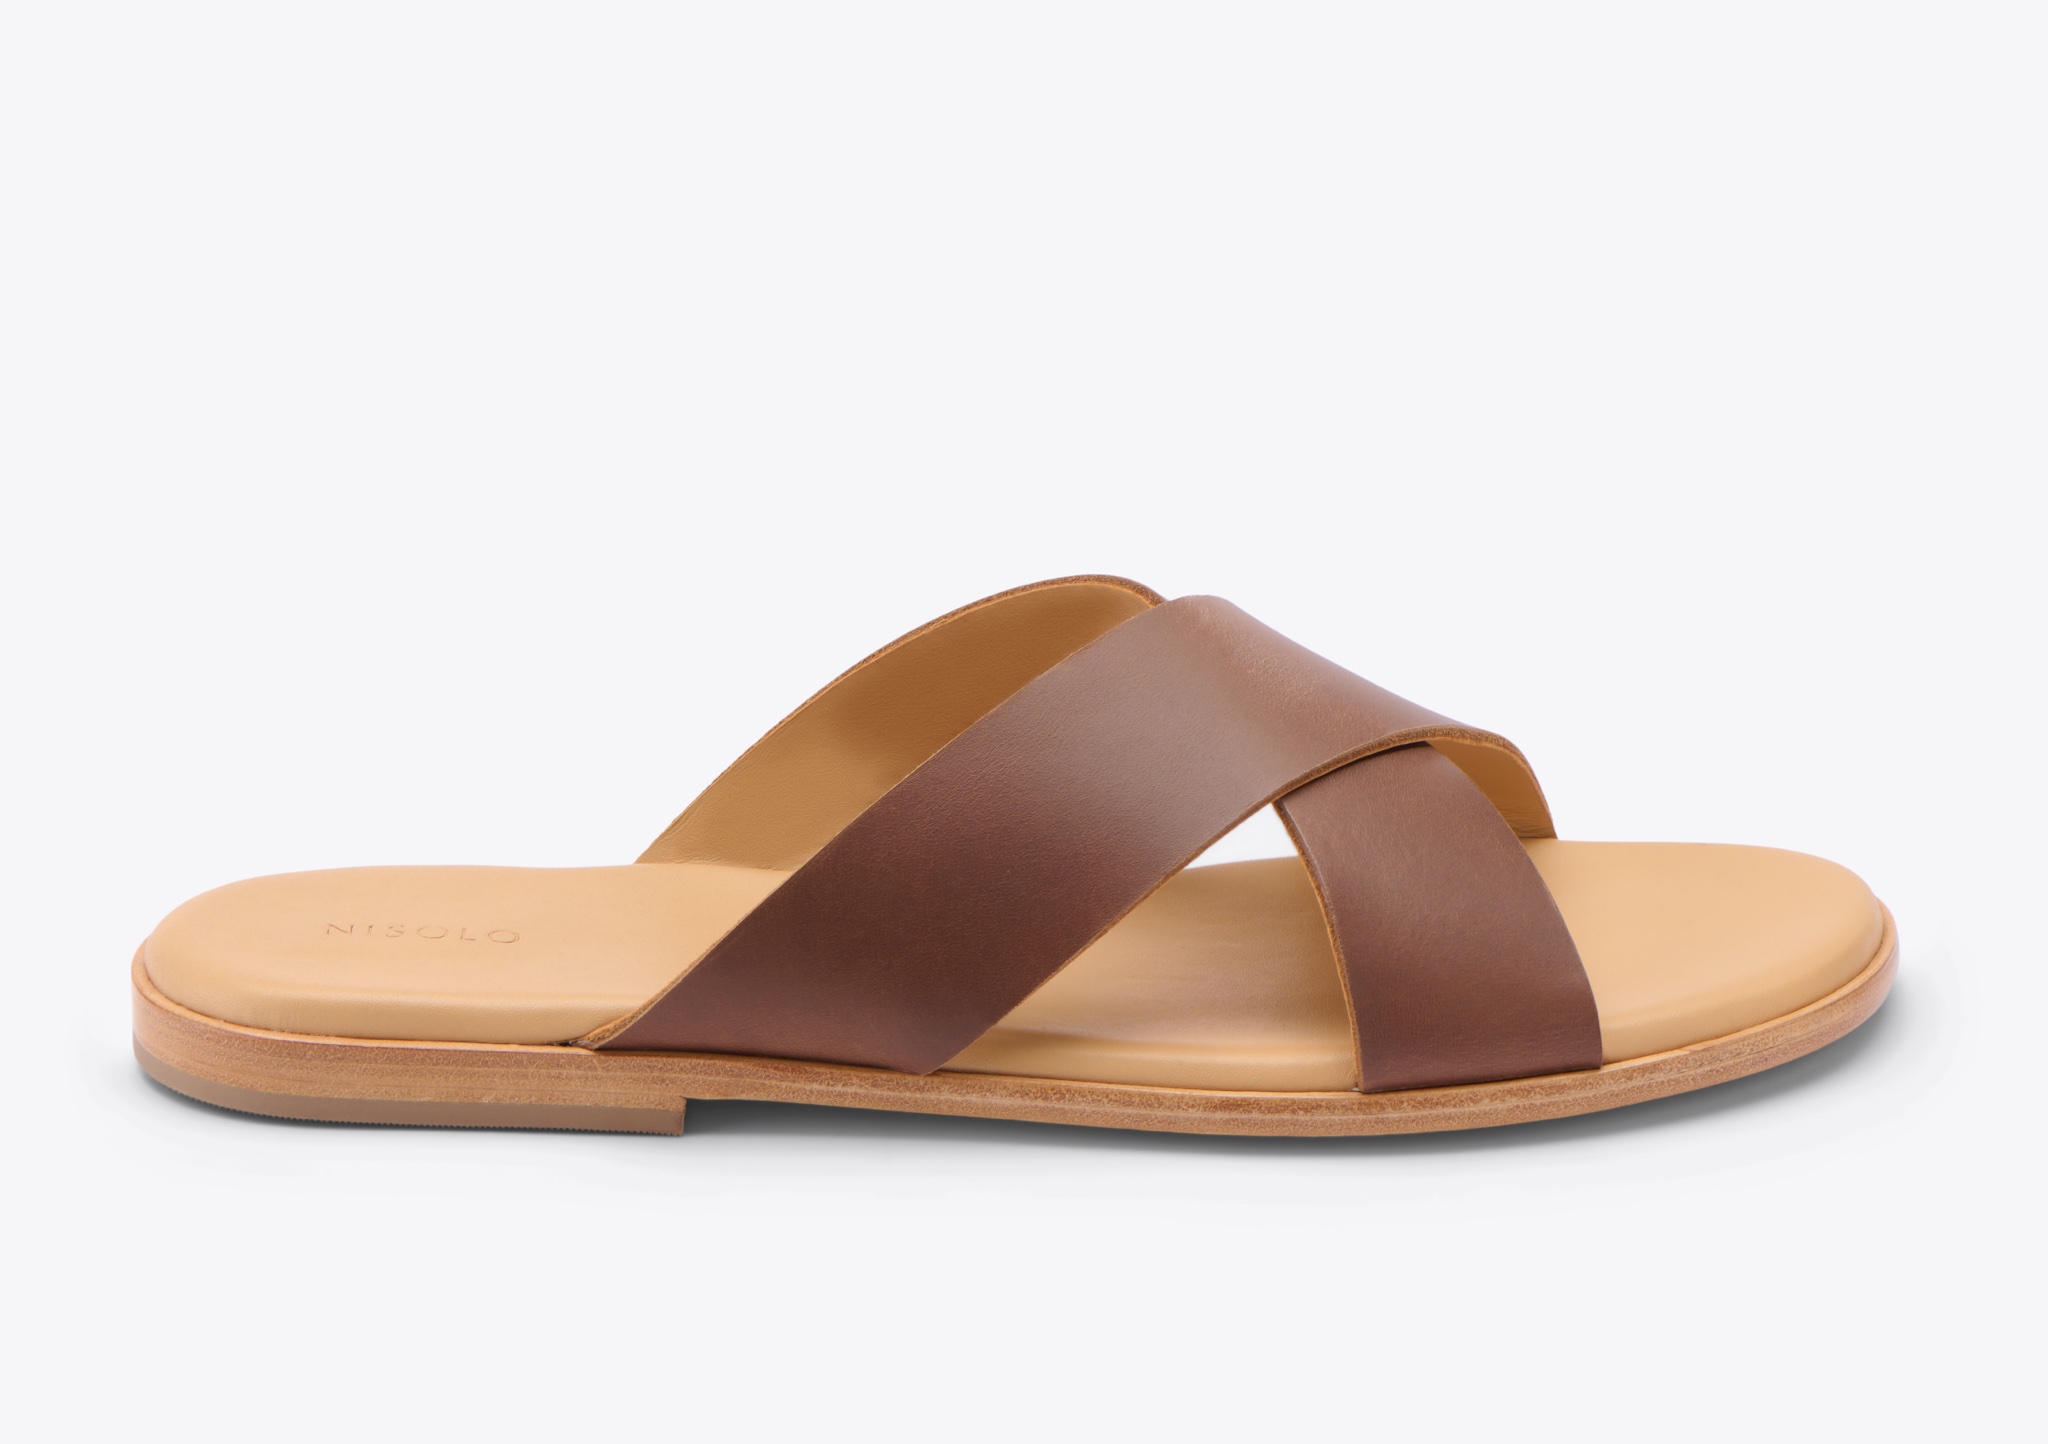 Nisolo Dante Cross Strap Sandal Brown - Every Nisolo product is built on the foundation of comfort, function, and design. 